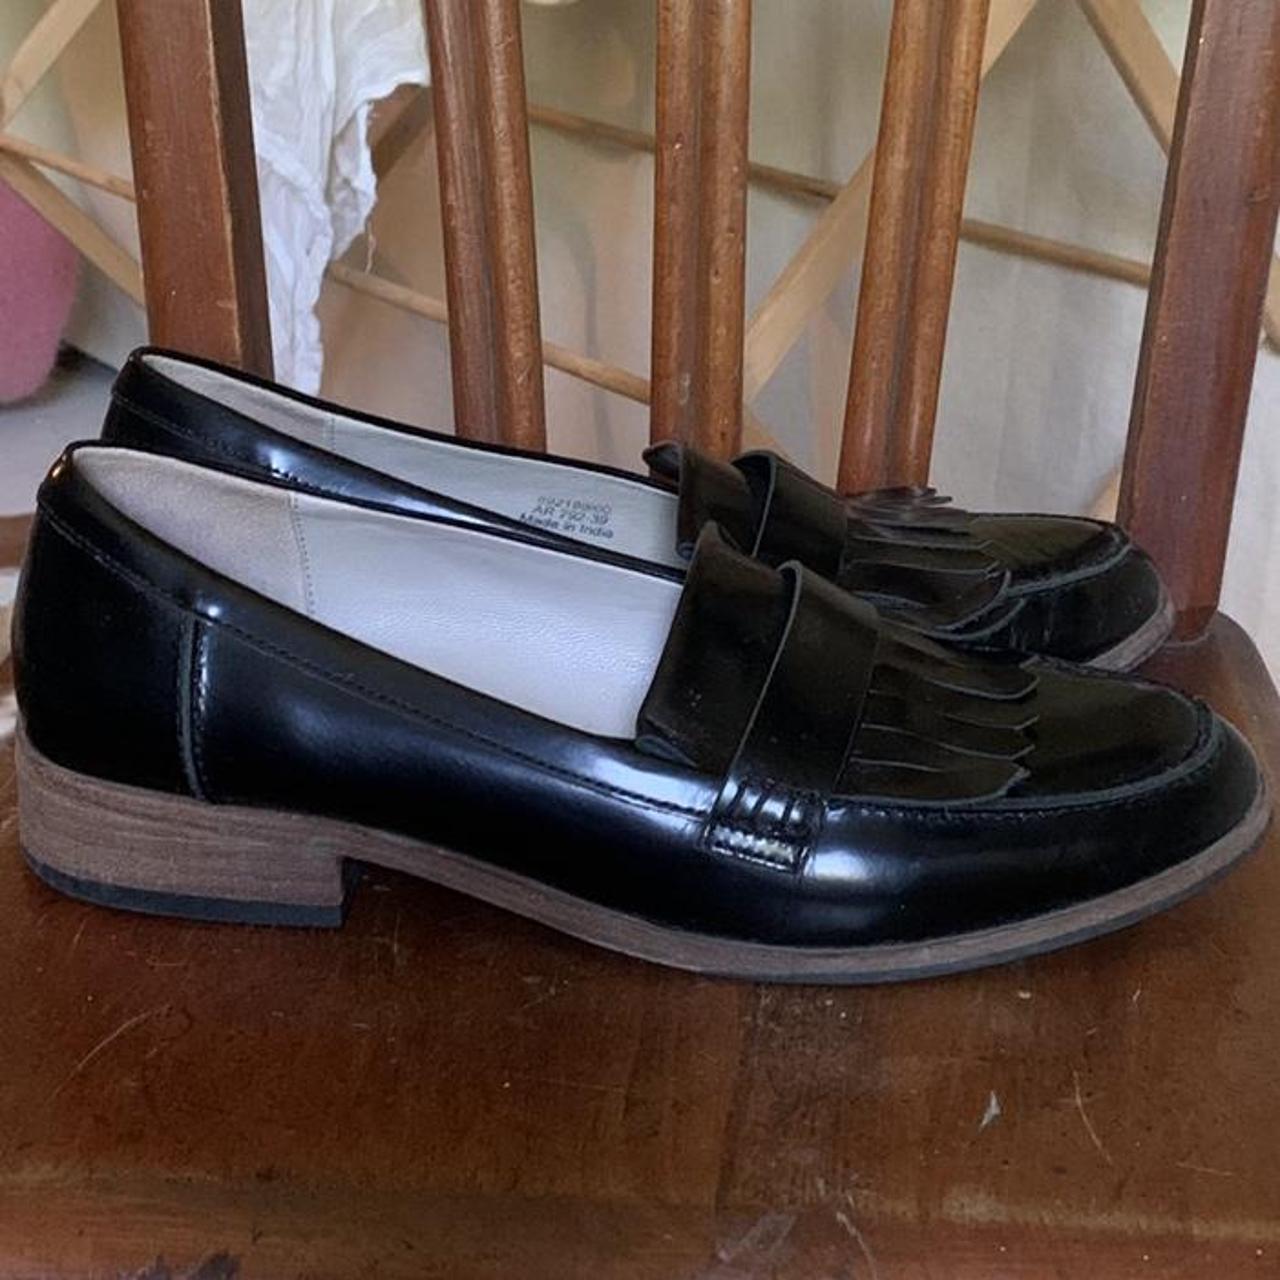 Boden Loafers Patent leather Fringe detail Very... - Depop